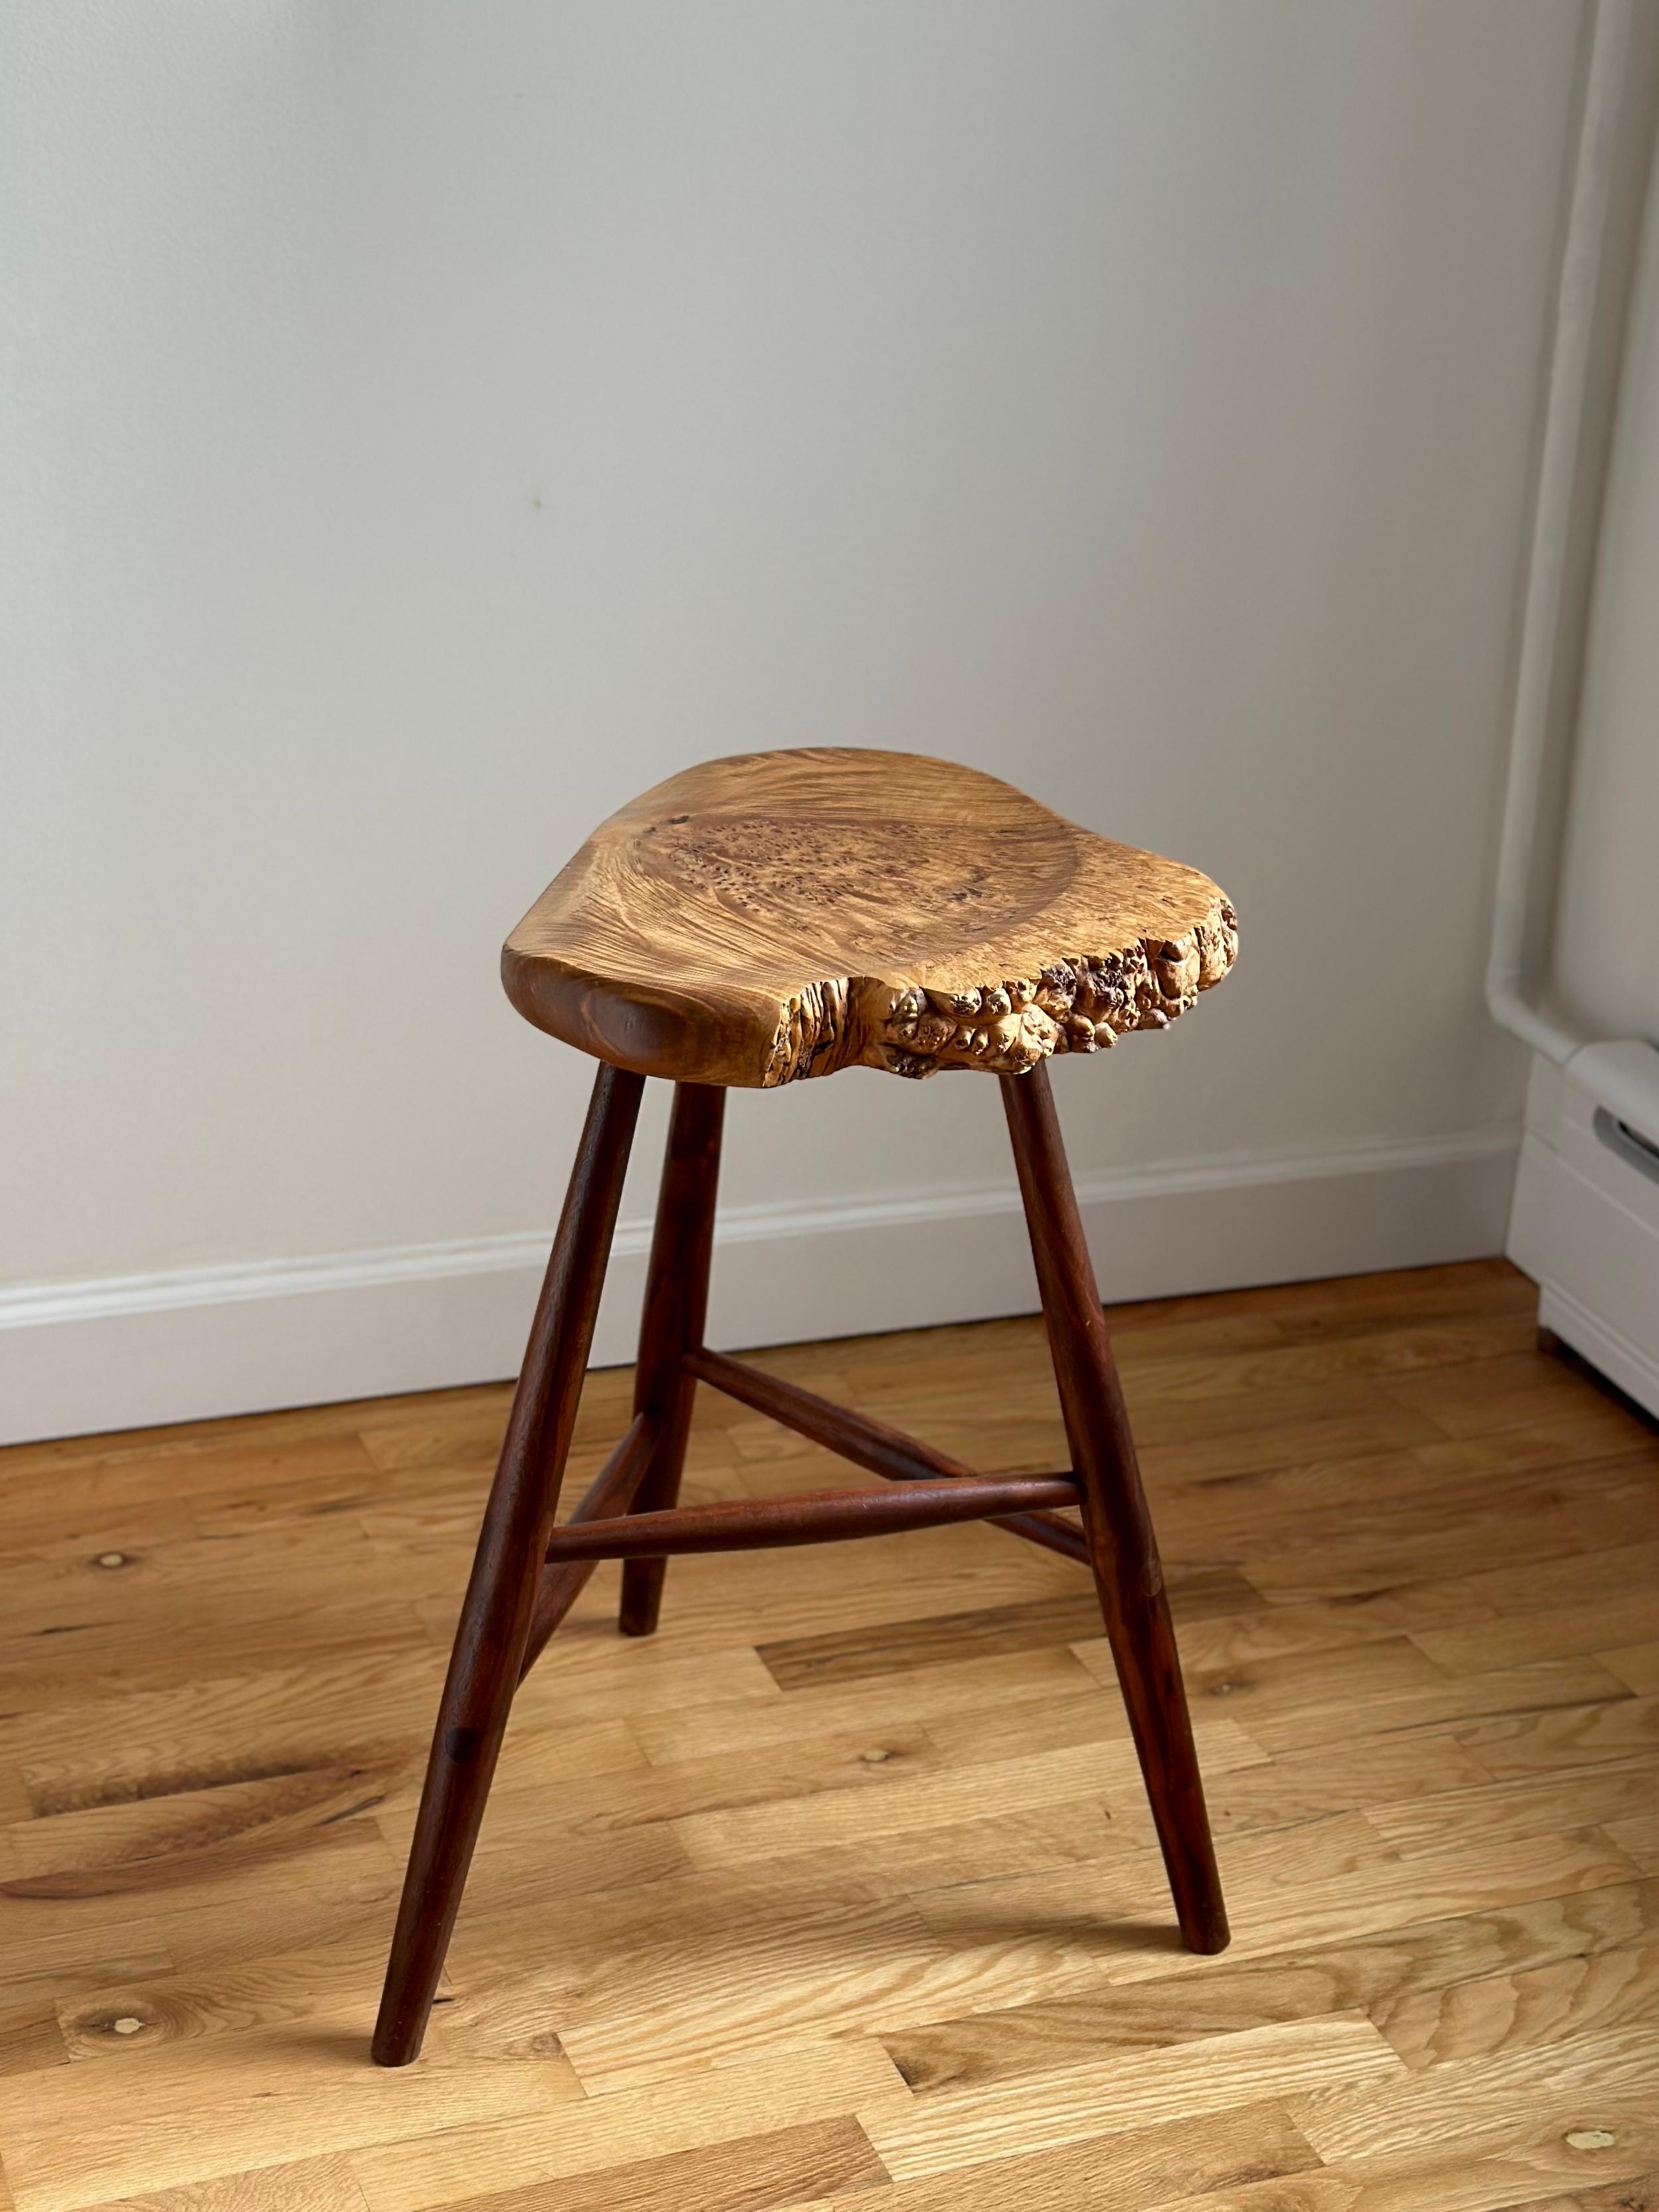 American Studio Live Edge Stool in Walnut and Maple Burl by Michael Elkan For Sale 1